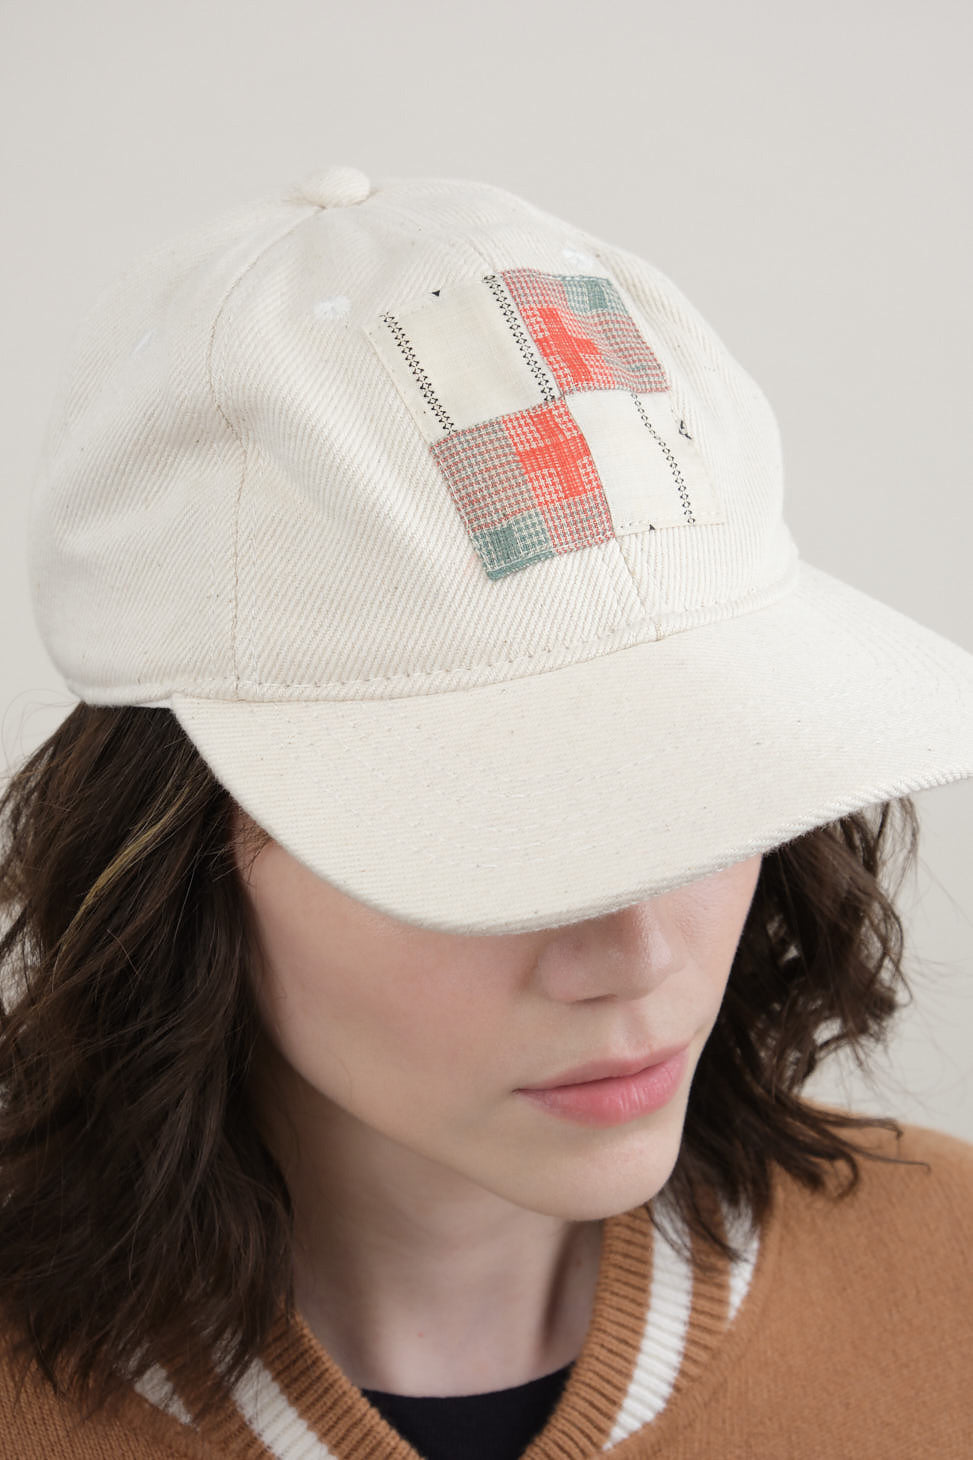 VIntage patch on Ball Cap